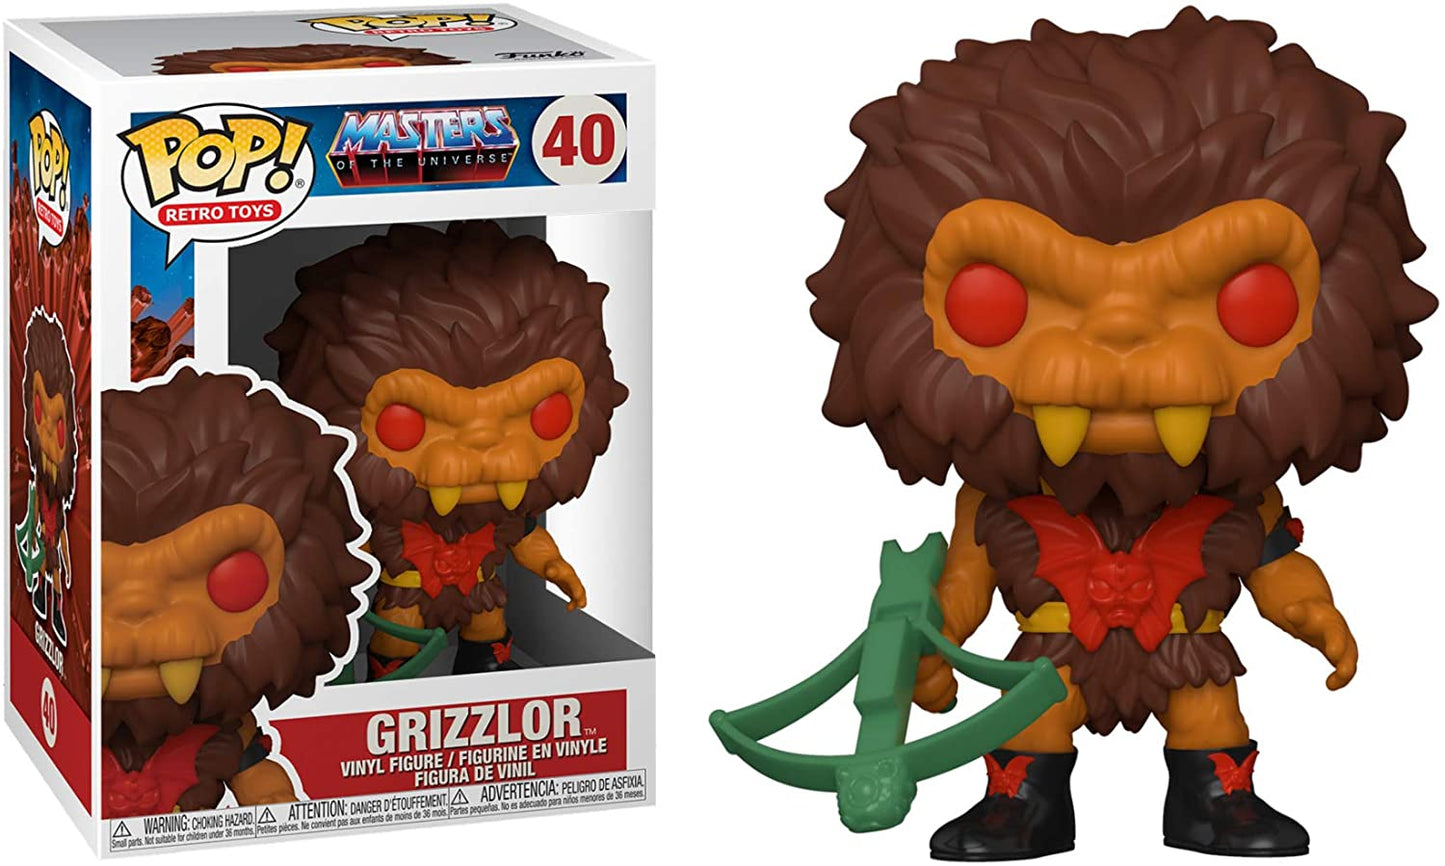 MASTERS OF THE UNIVERSE: GRIZZLOR #40 - FUNKO POP!